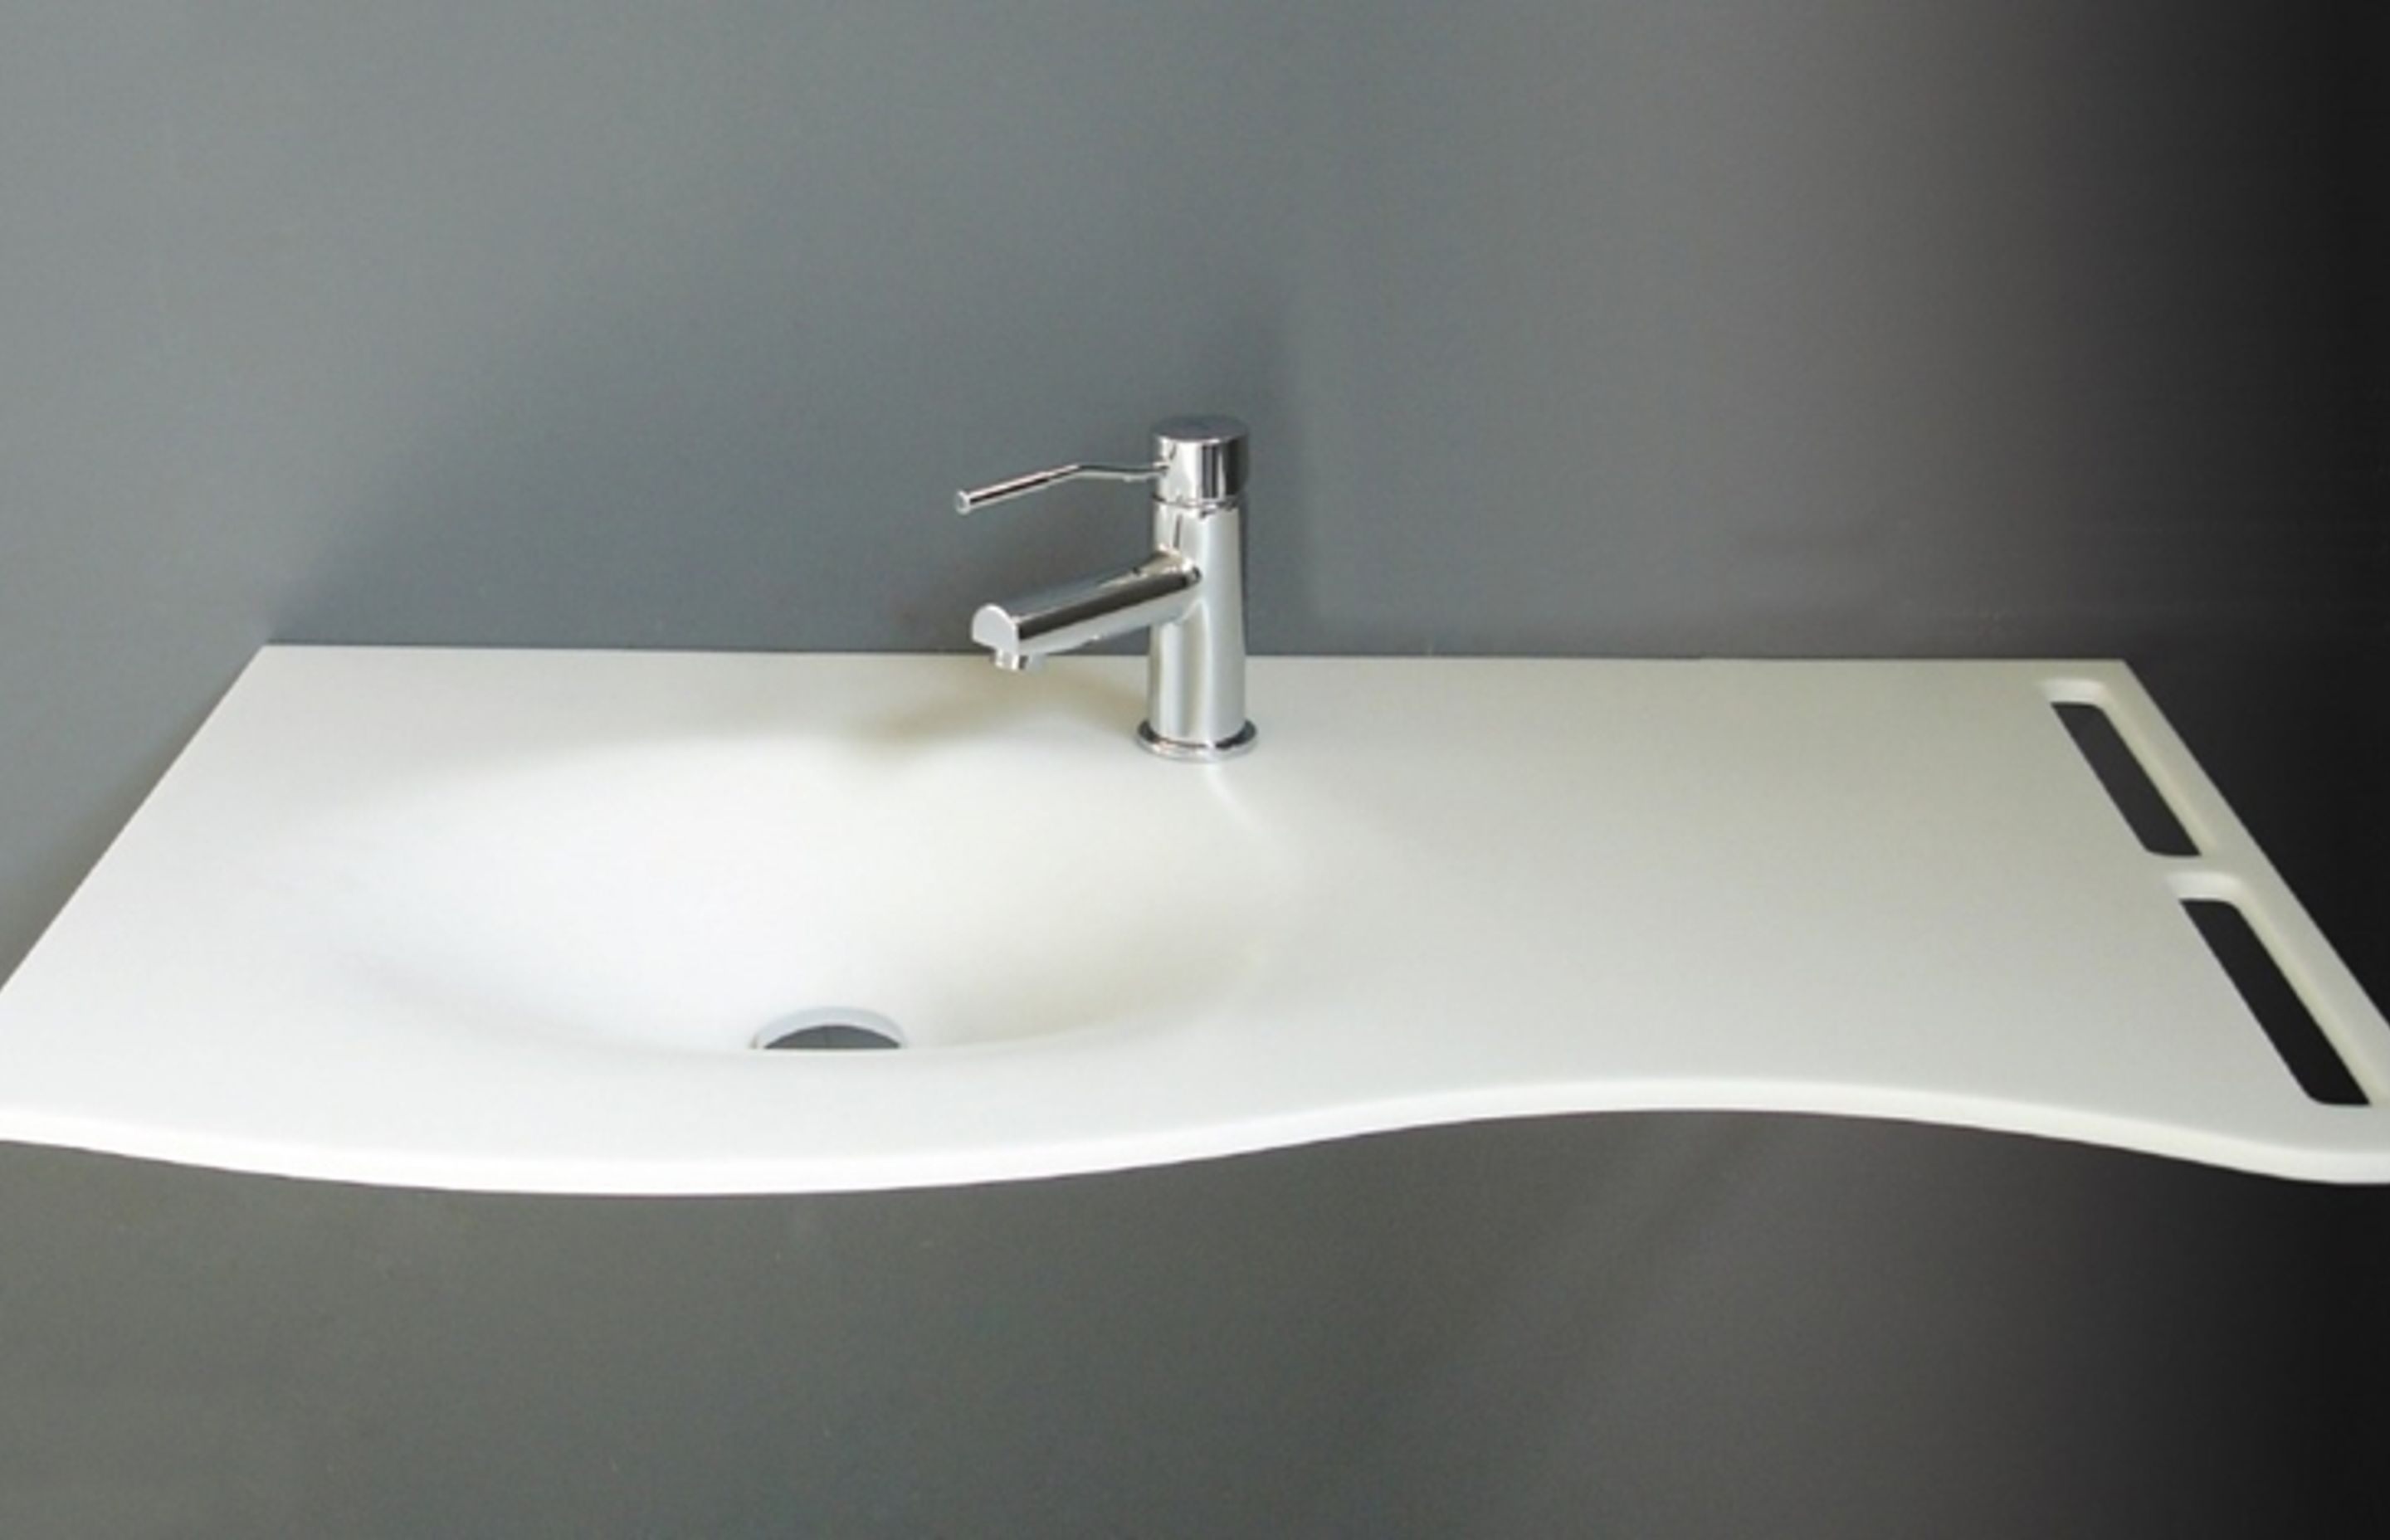 A combination of style and accessibility is the goal of SA Plumbing.